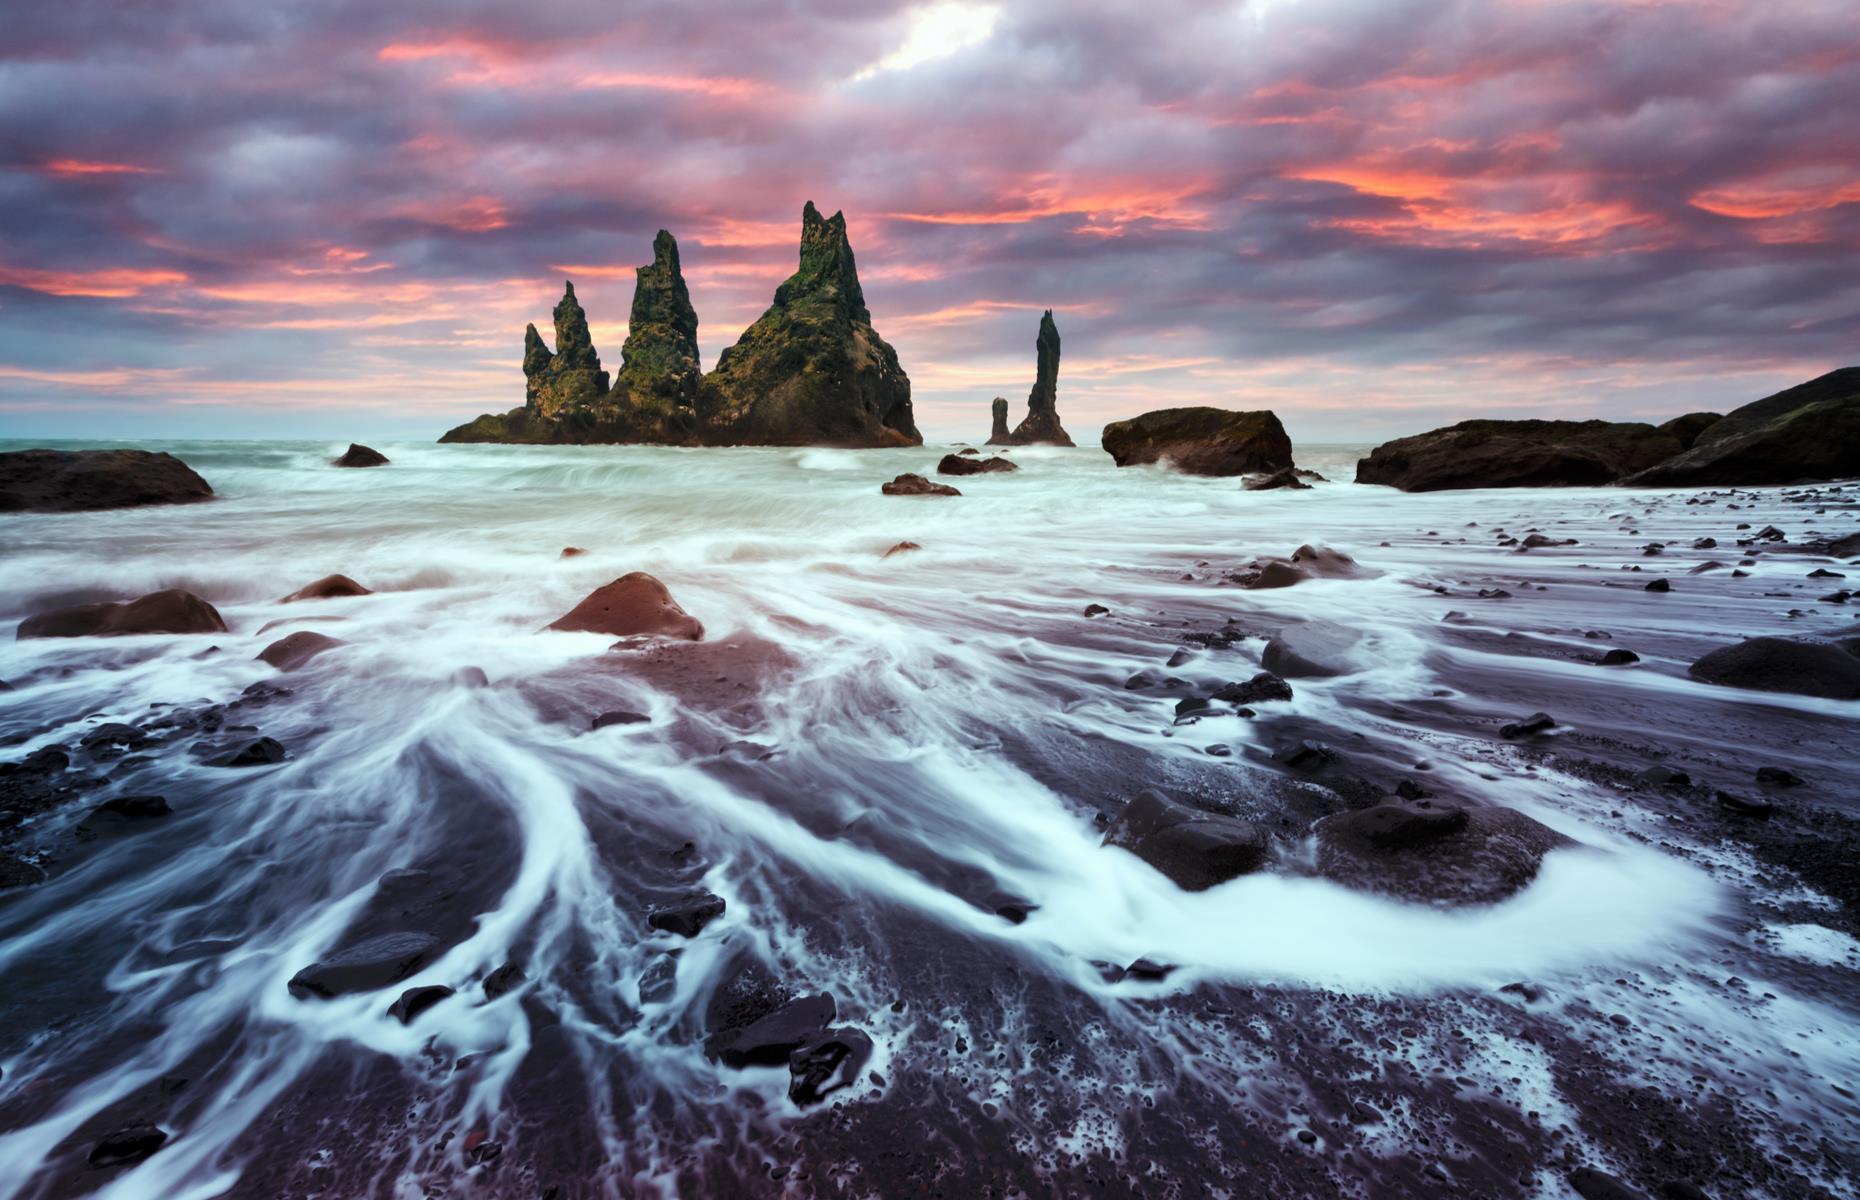 <p>Rising out from the ocean, close to the tiny village of Vík í Mýrdal, are the Reynisdrangar – three mighty basalt sea cliffs soaring to 217 feet (66m). According to Icelandic folklore, these jagged rocks are actually the remains of a fated group of trolls. It's said that the troublesome trolls caught sight of a ship out at sea and decided to pull it to shore under the cover of darkness. However, their dastardly deed took too long. Dawn broke and the trolls were immediately turned to stone. They remain a favored subject for roving photographers. </p>  <p><strong>Liked this? Click on the Follow button above for more great stories from loveEXPLORING</strong></p>  <p><strong><a href="https://www.loveexploring.com/galleries/89068/the-most-mysterious-places-on-earth">Now delve into the most mysterious places on Earth</a></strong></p>